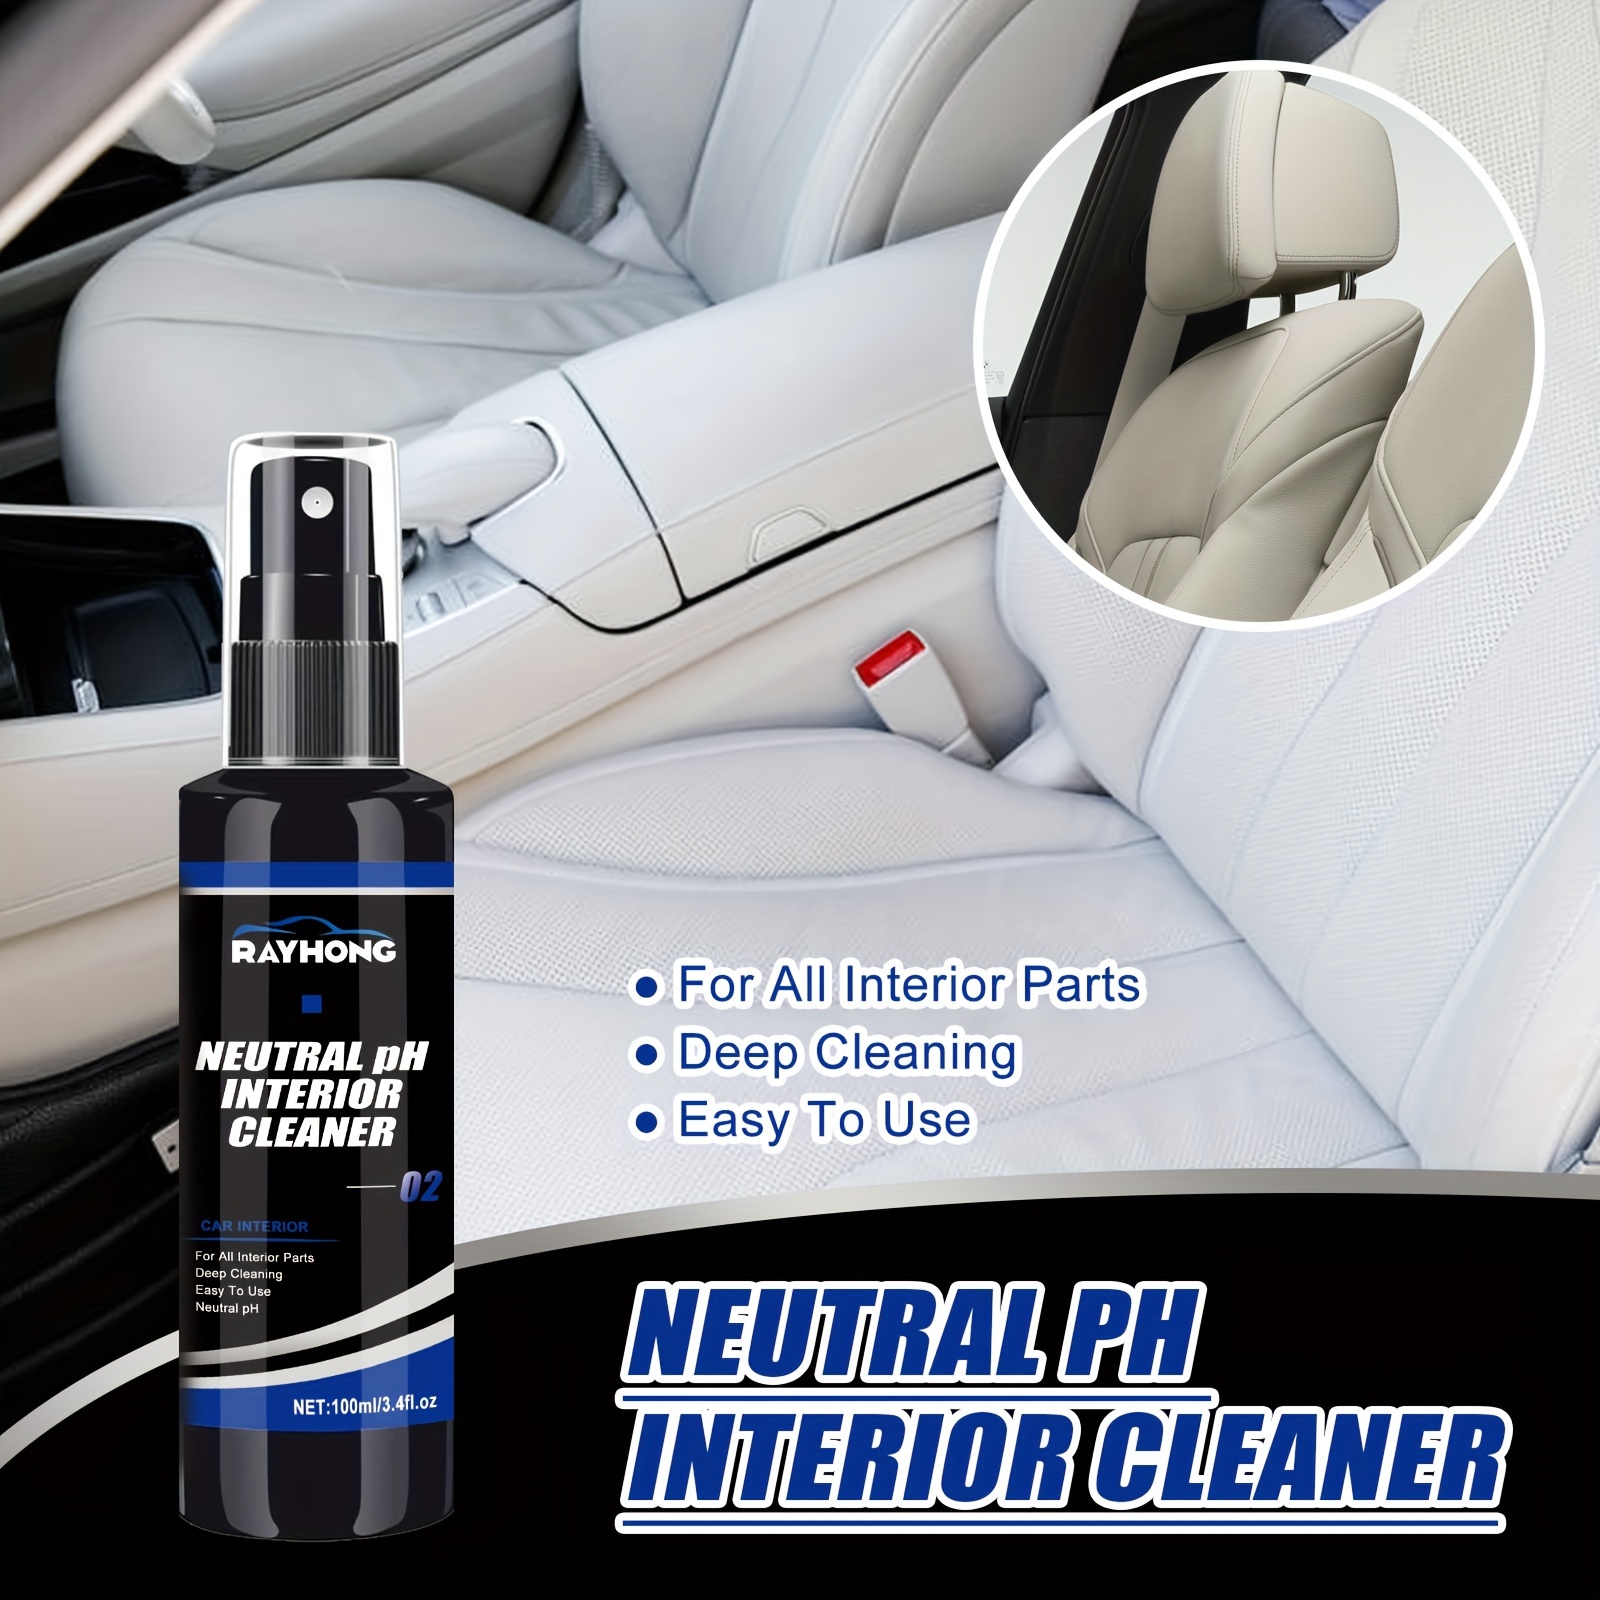  MiracleSpray for Auto - All Purpose Super Cleaner for Car  Interior and Exterior Detailing - Easy to Use on Upholstery Fabric -  Leather, Plastic, Rubber, Vinyl - (16 oz) : Automotive